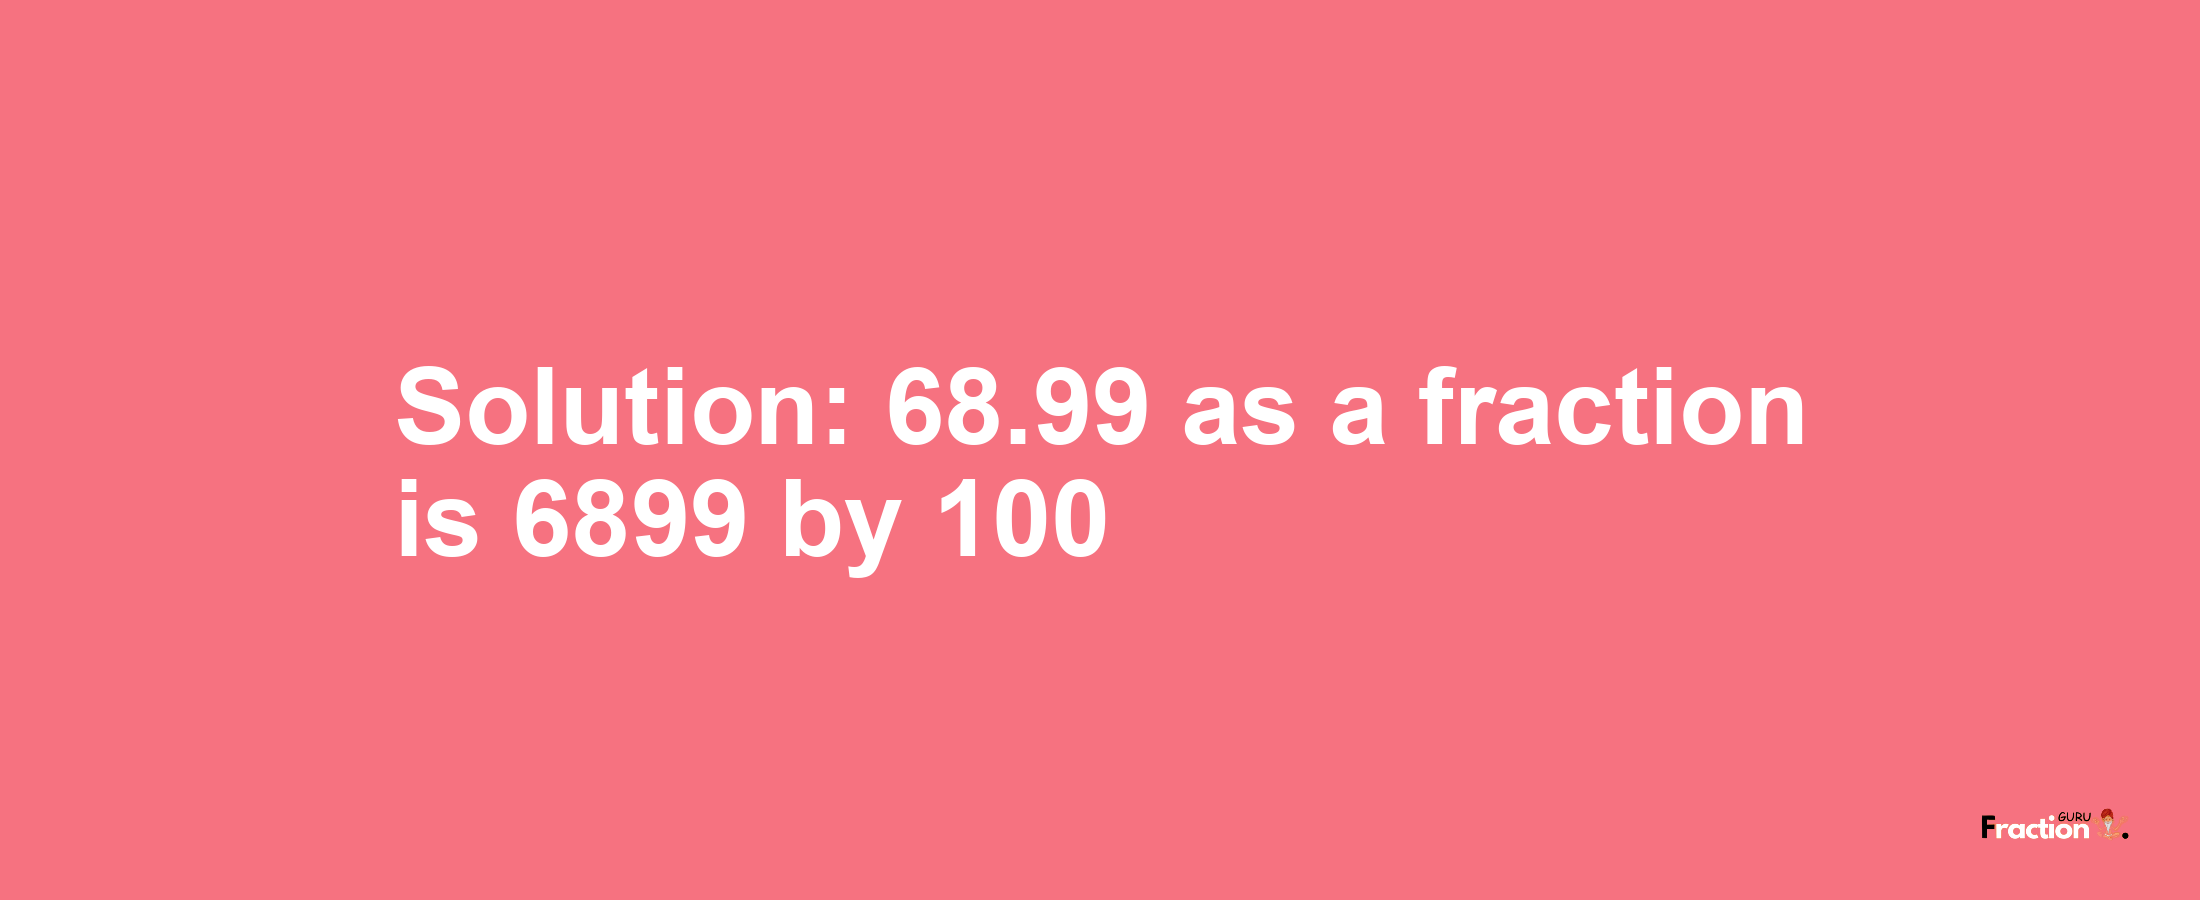 Solution:68.99 as a fraction is 6899/100